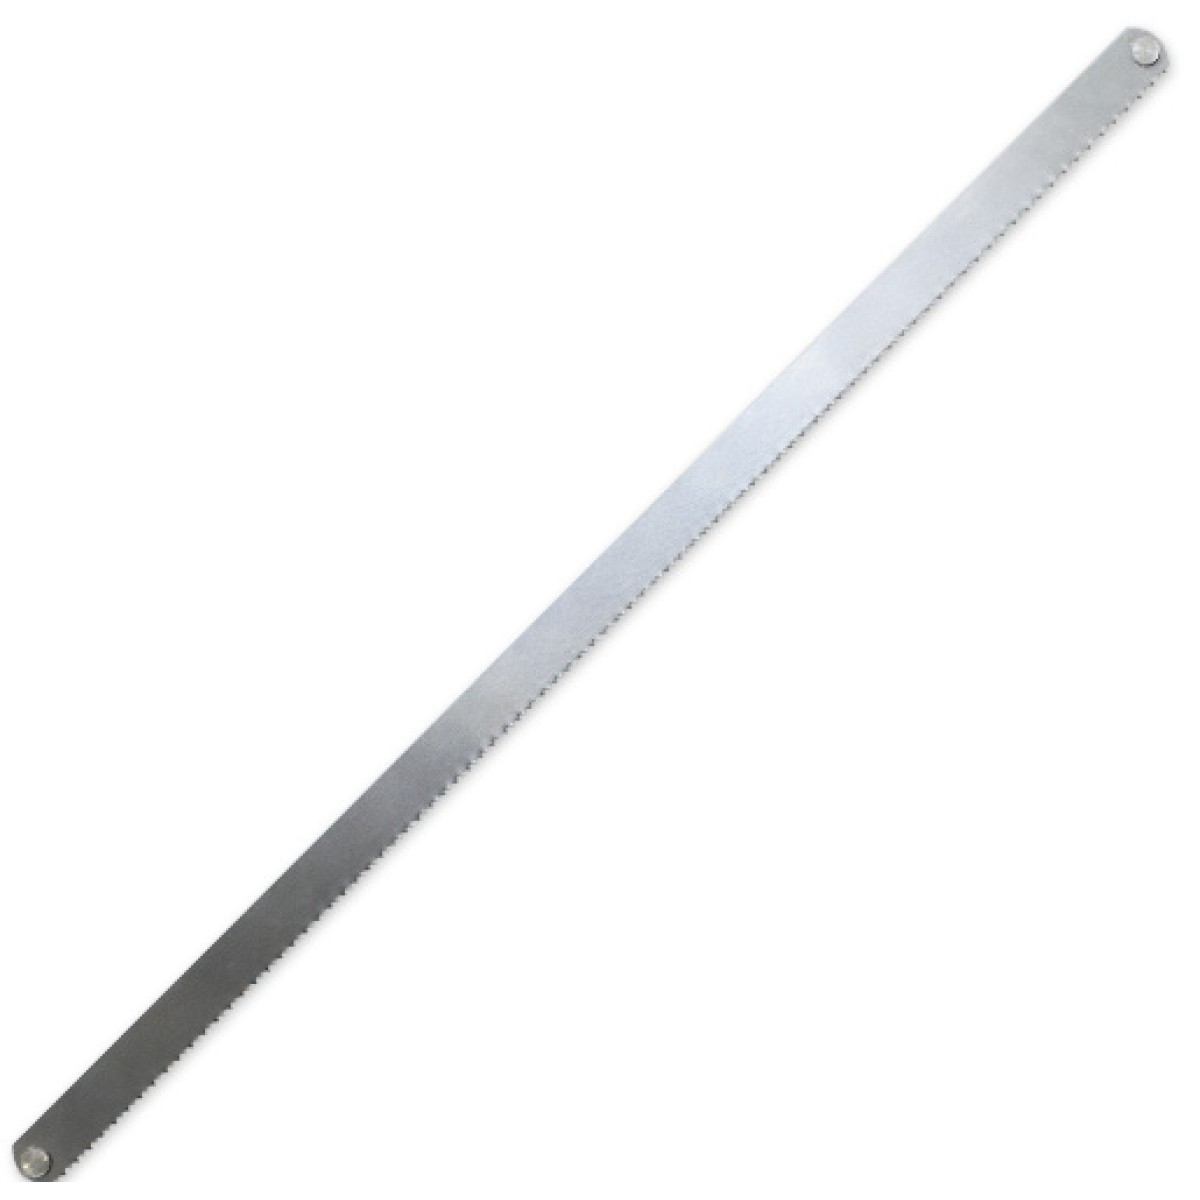 HANDSAW BLADE DICK 20 INCH STAINLESS ST